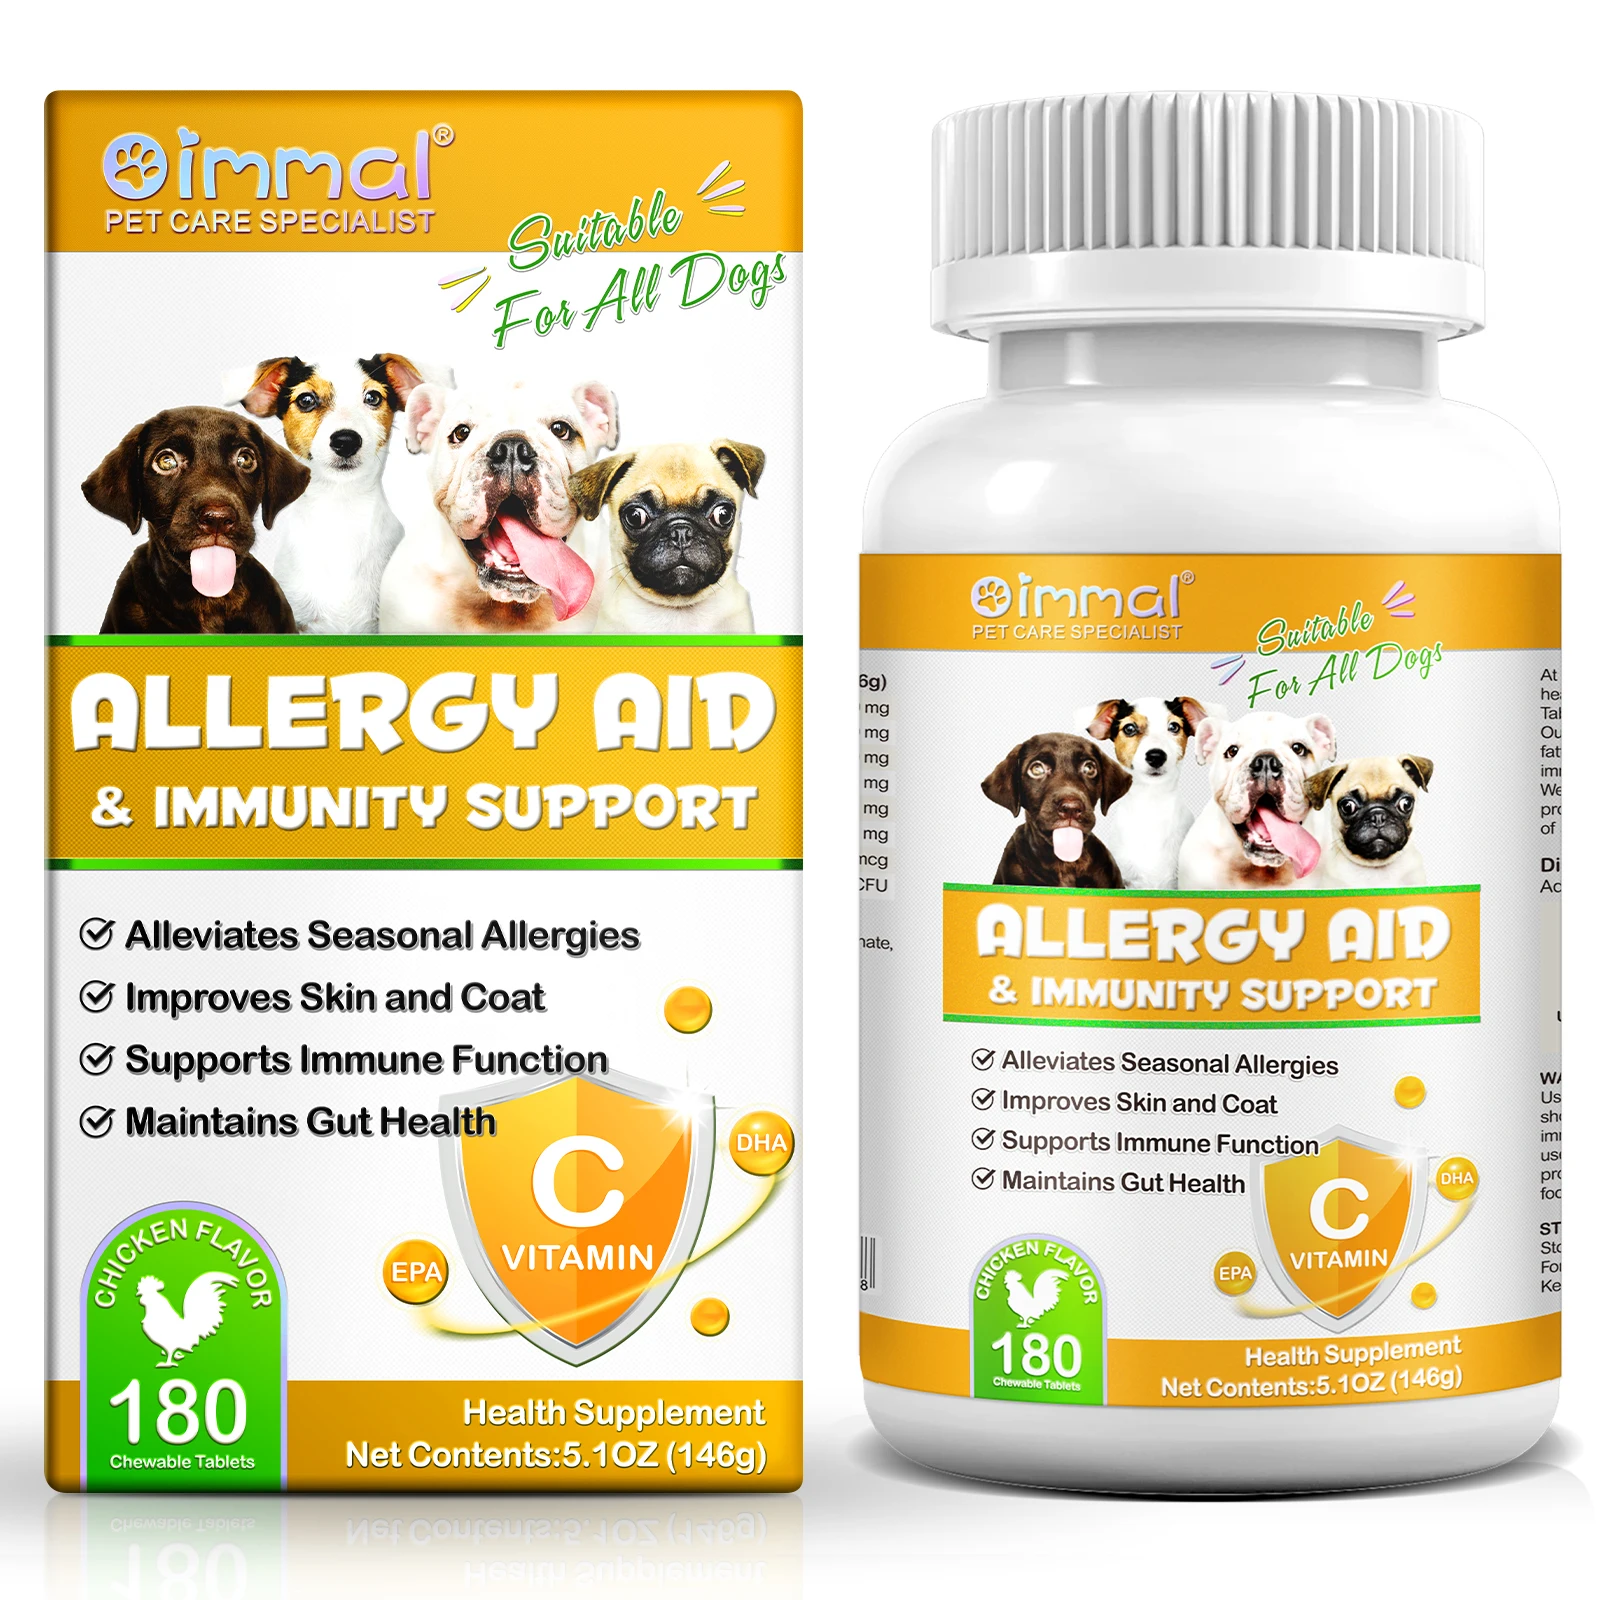 

Comprehensive Canine Allergy Aid & Immunity Support Strengthening Dog's Defenses Against Allergens Enhanced Health and Vitality